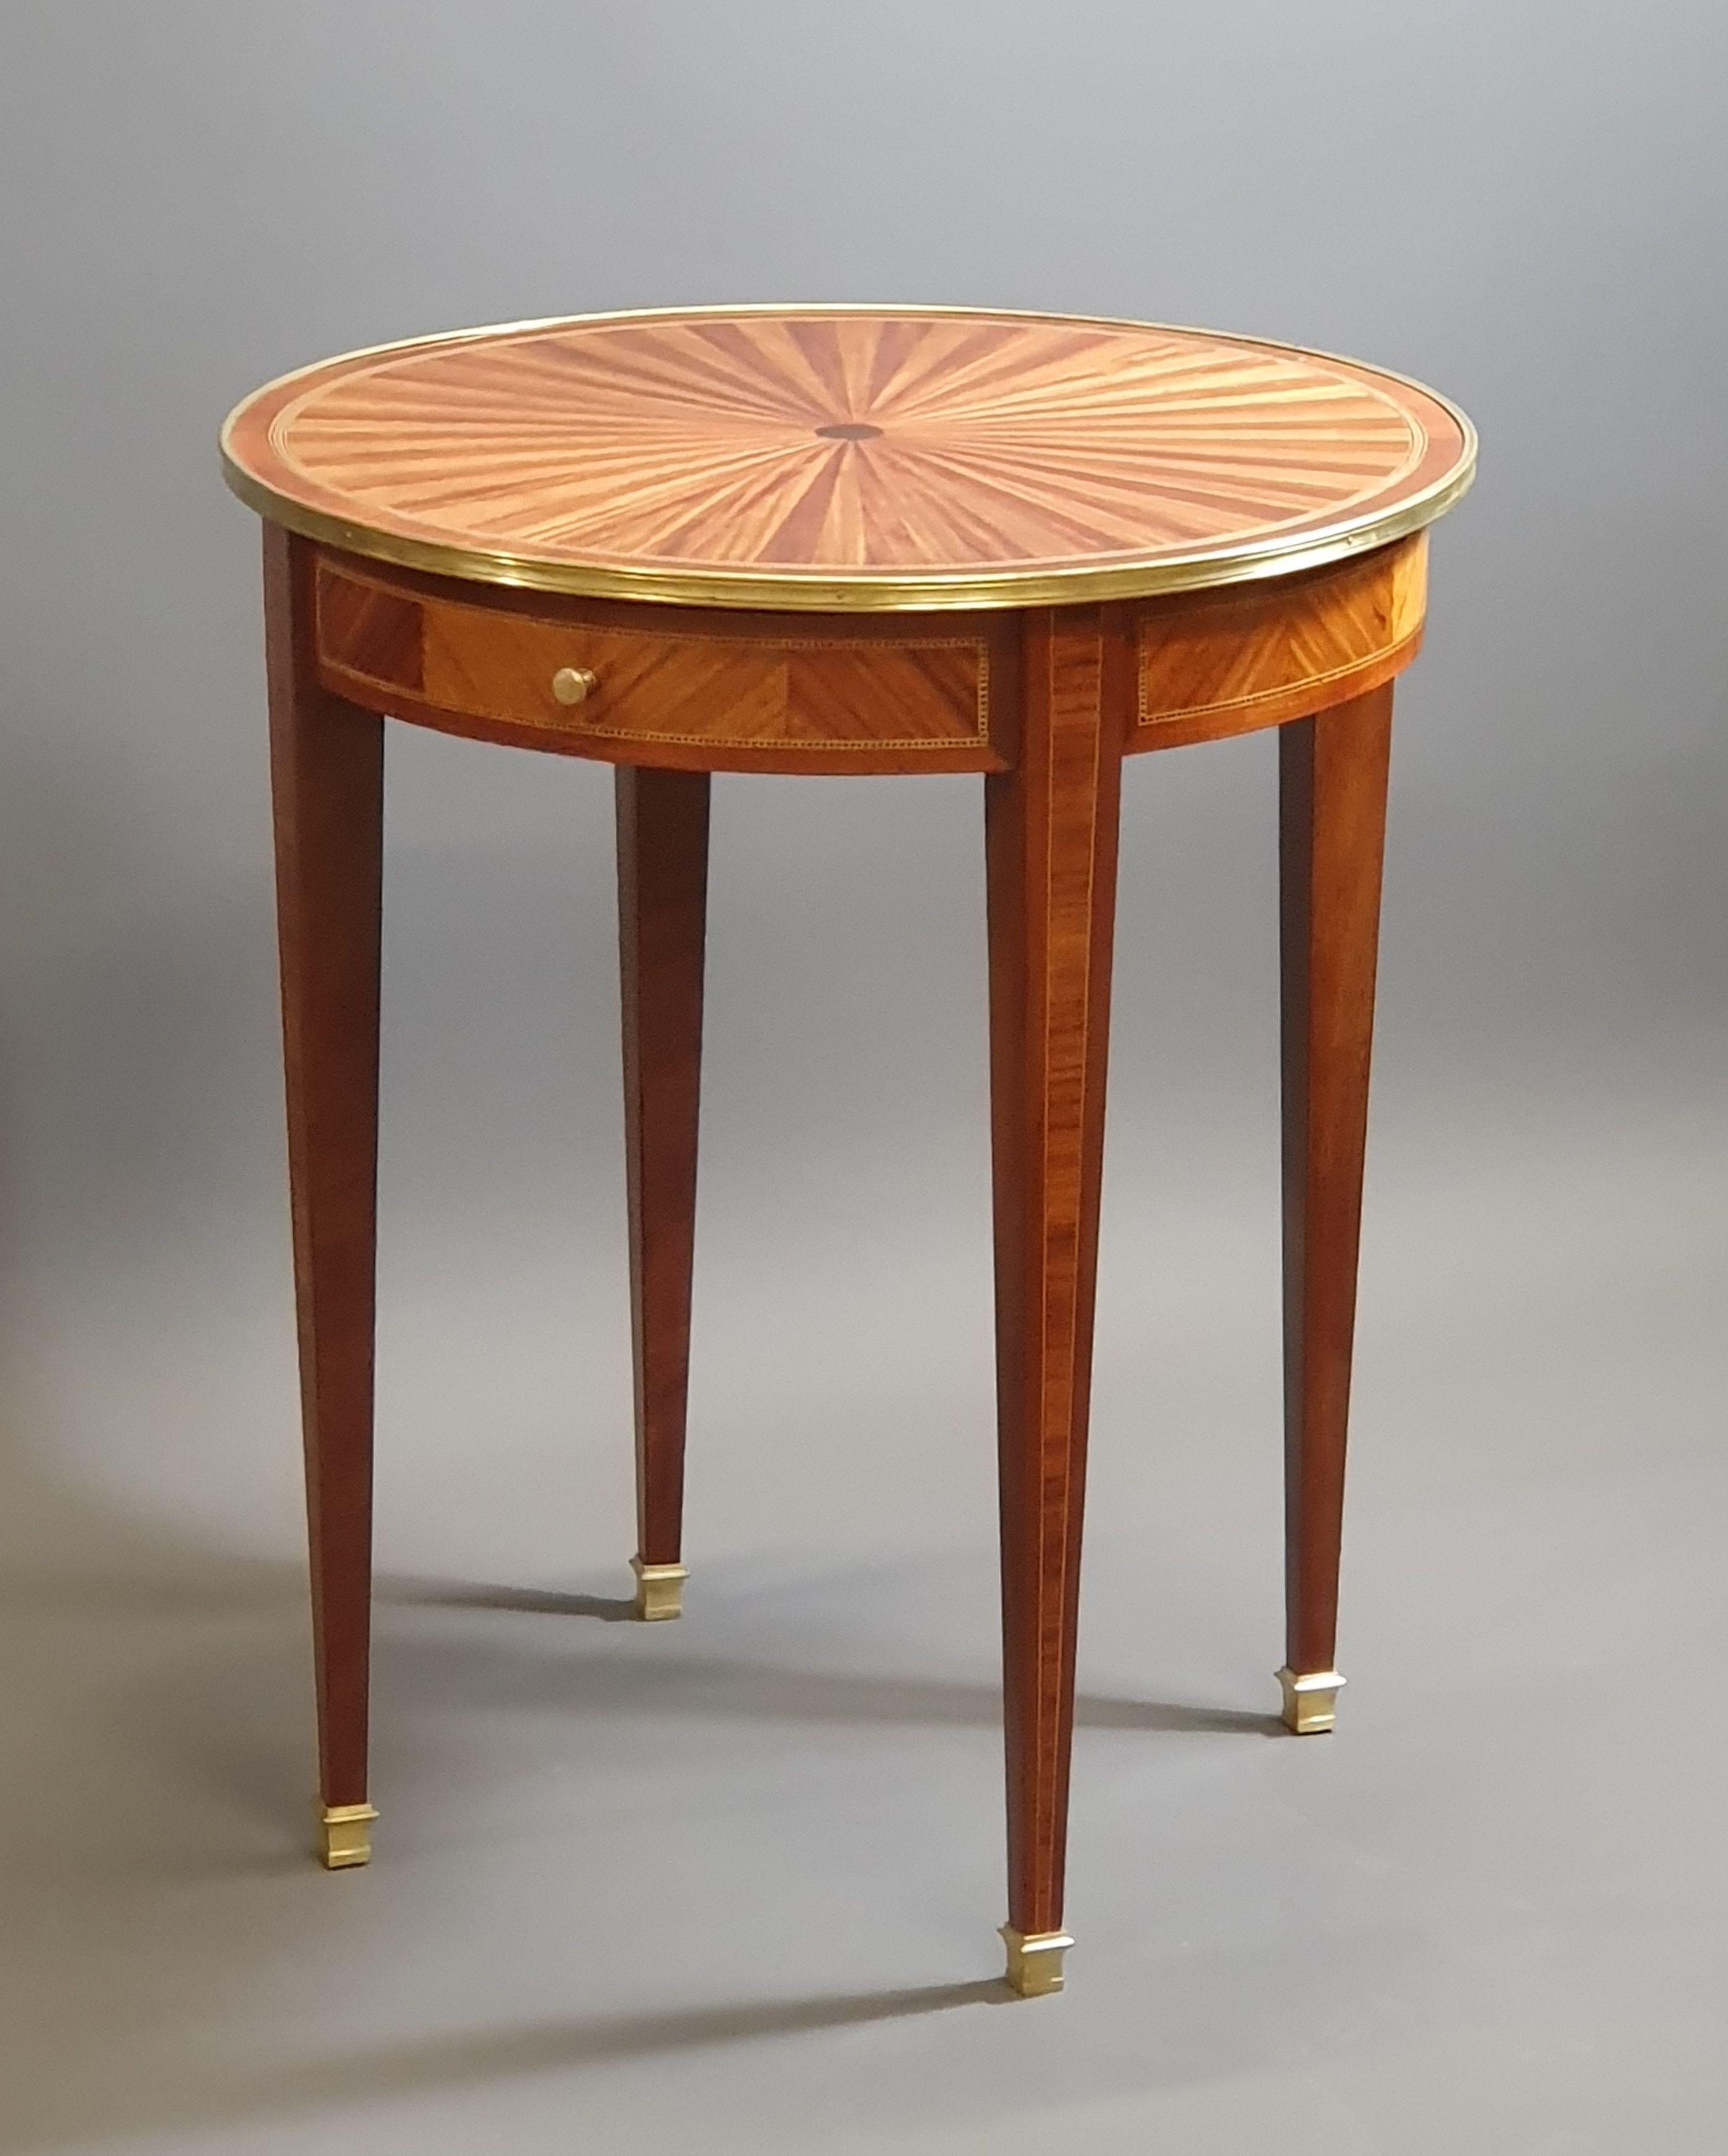 Elegant Louis XVI gueridon in rosewood and mahogany veneer resting on four sheathed legs and presenting a radiant marquetry top surrounded by a gilt bronze mold.
Nets in checkerboards of light wood and ebony on the belt and on the top.

Opening a